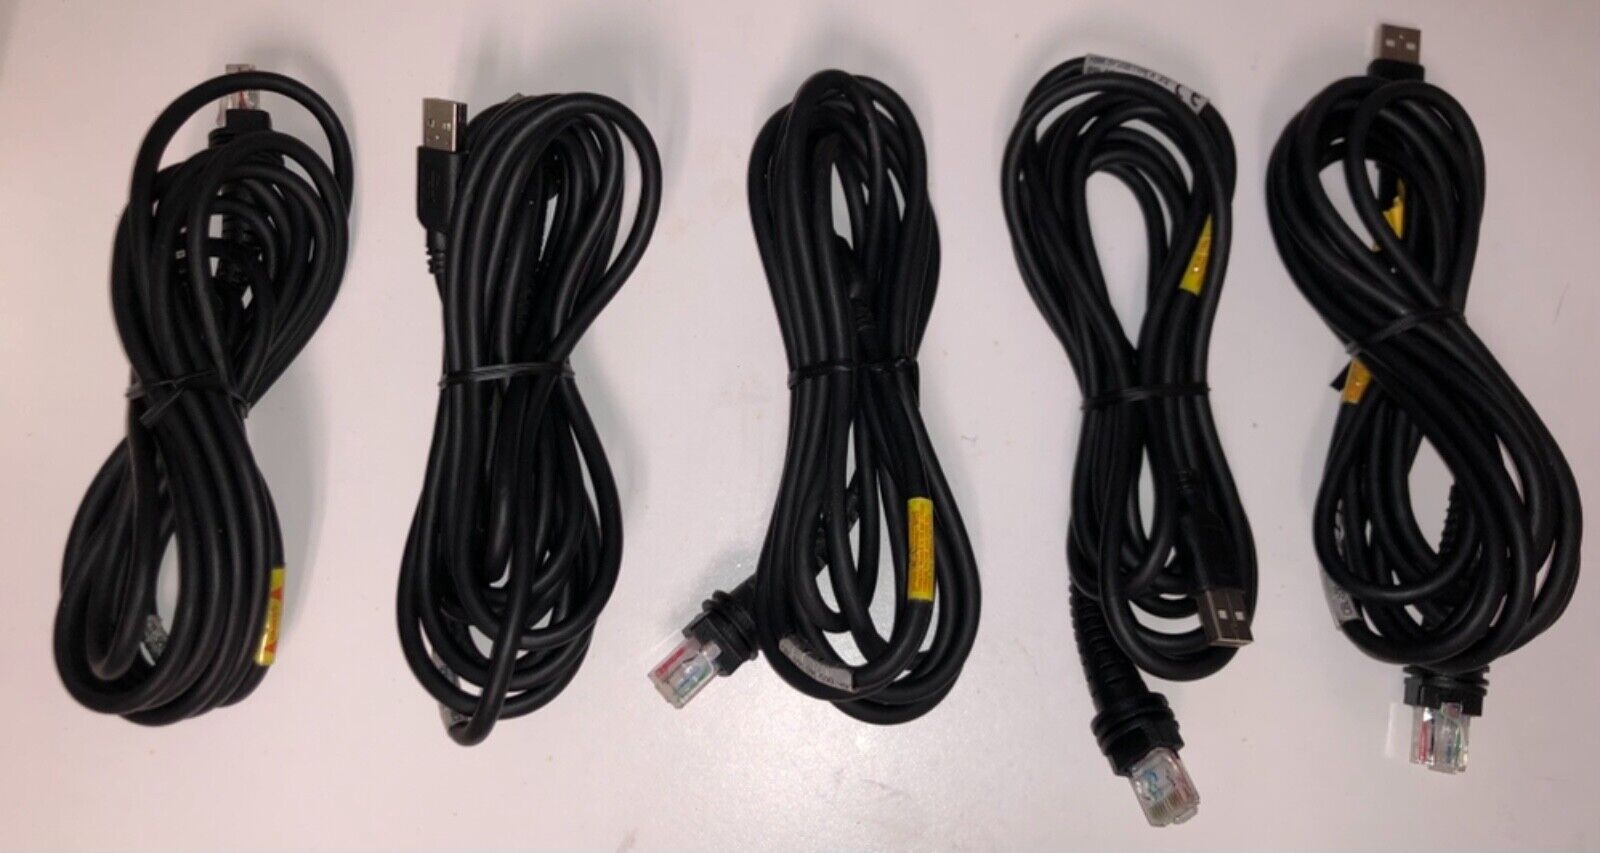 Lot of 5 Honeywell CBL-500-300-S00 Male USB Cable Type A  5V 3M/9.8ft